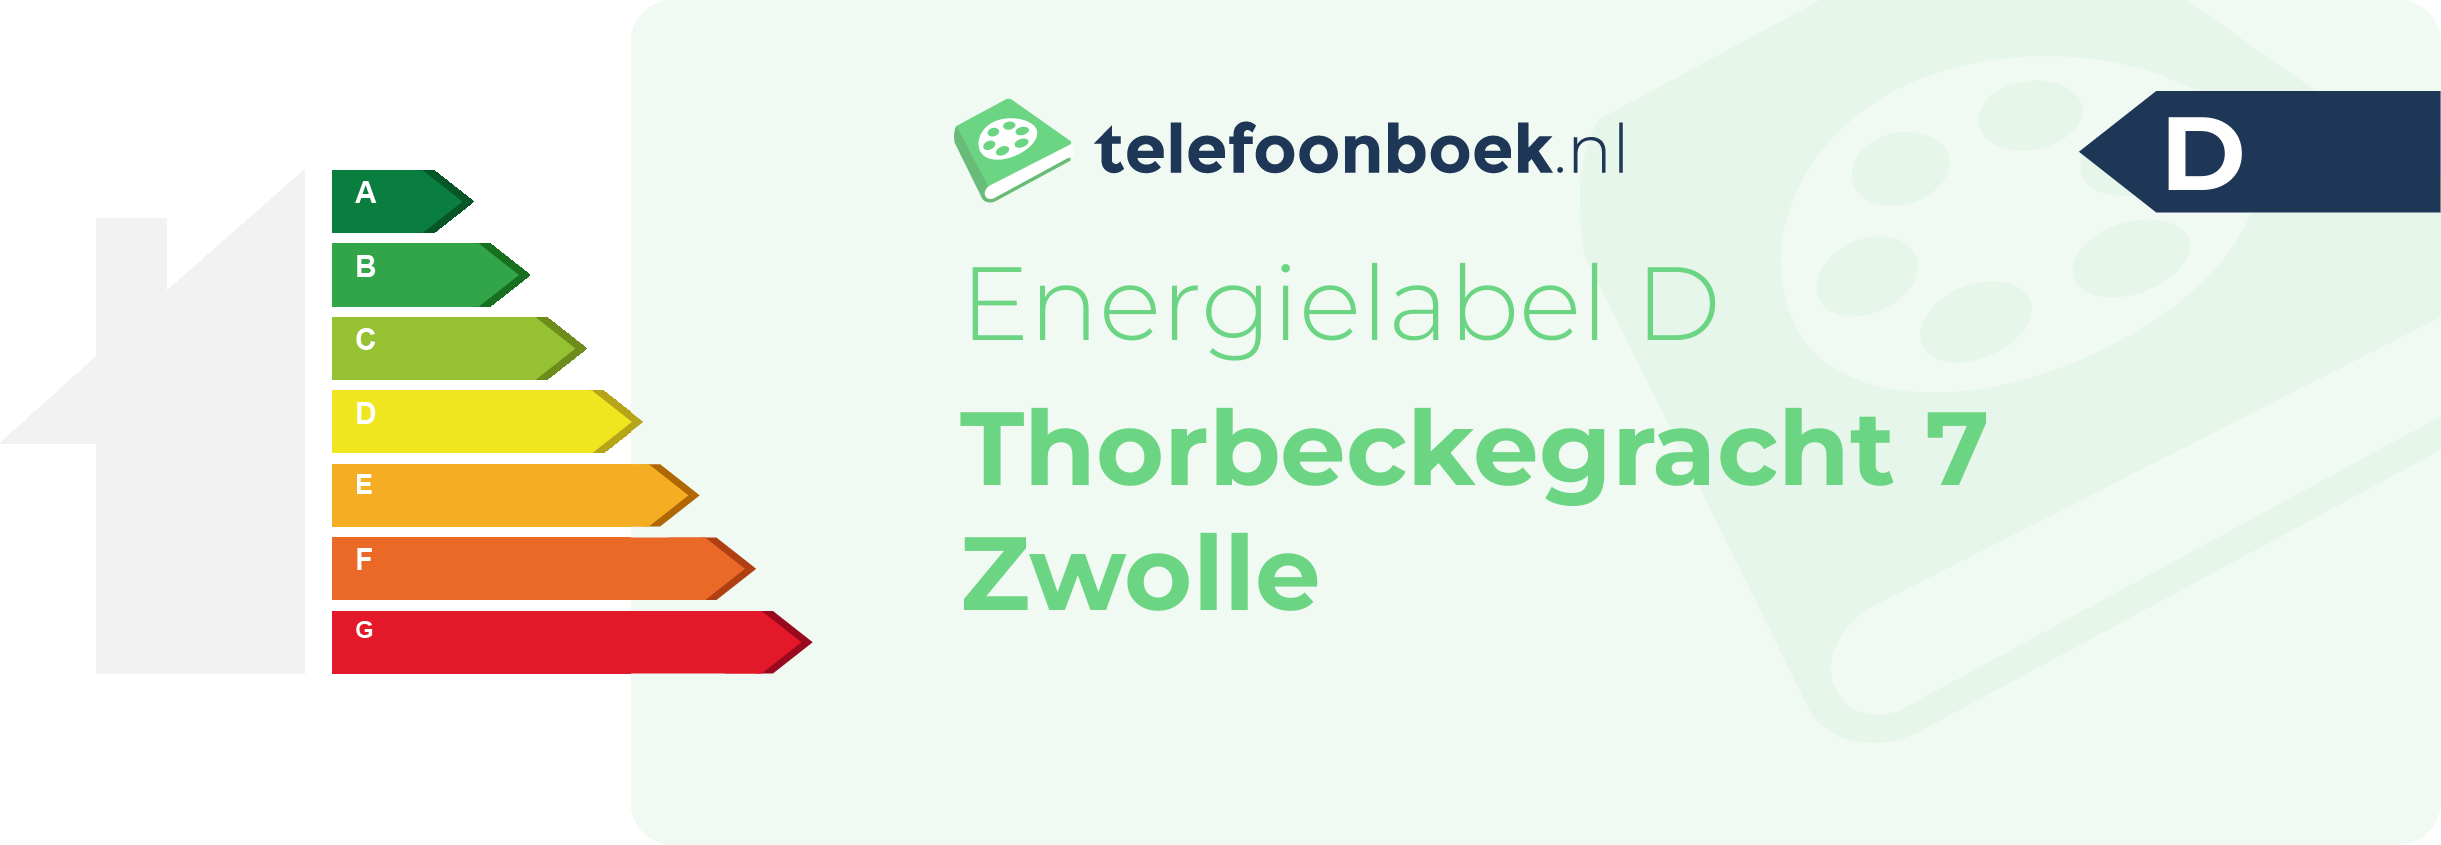 Energielabel Thorbeckegracht 7 Zwolle